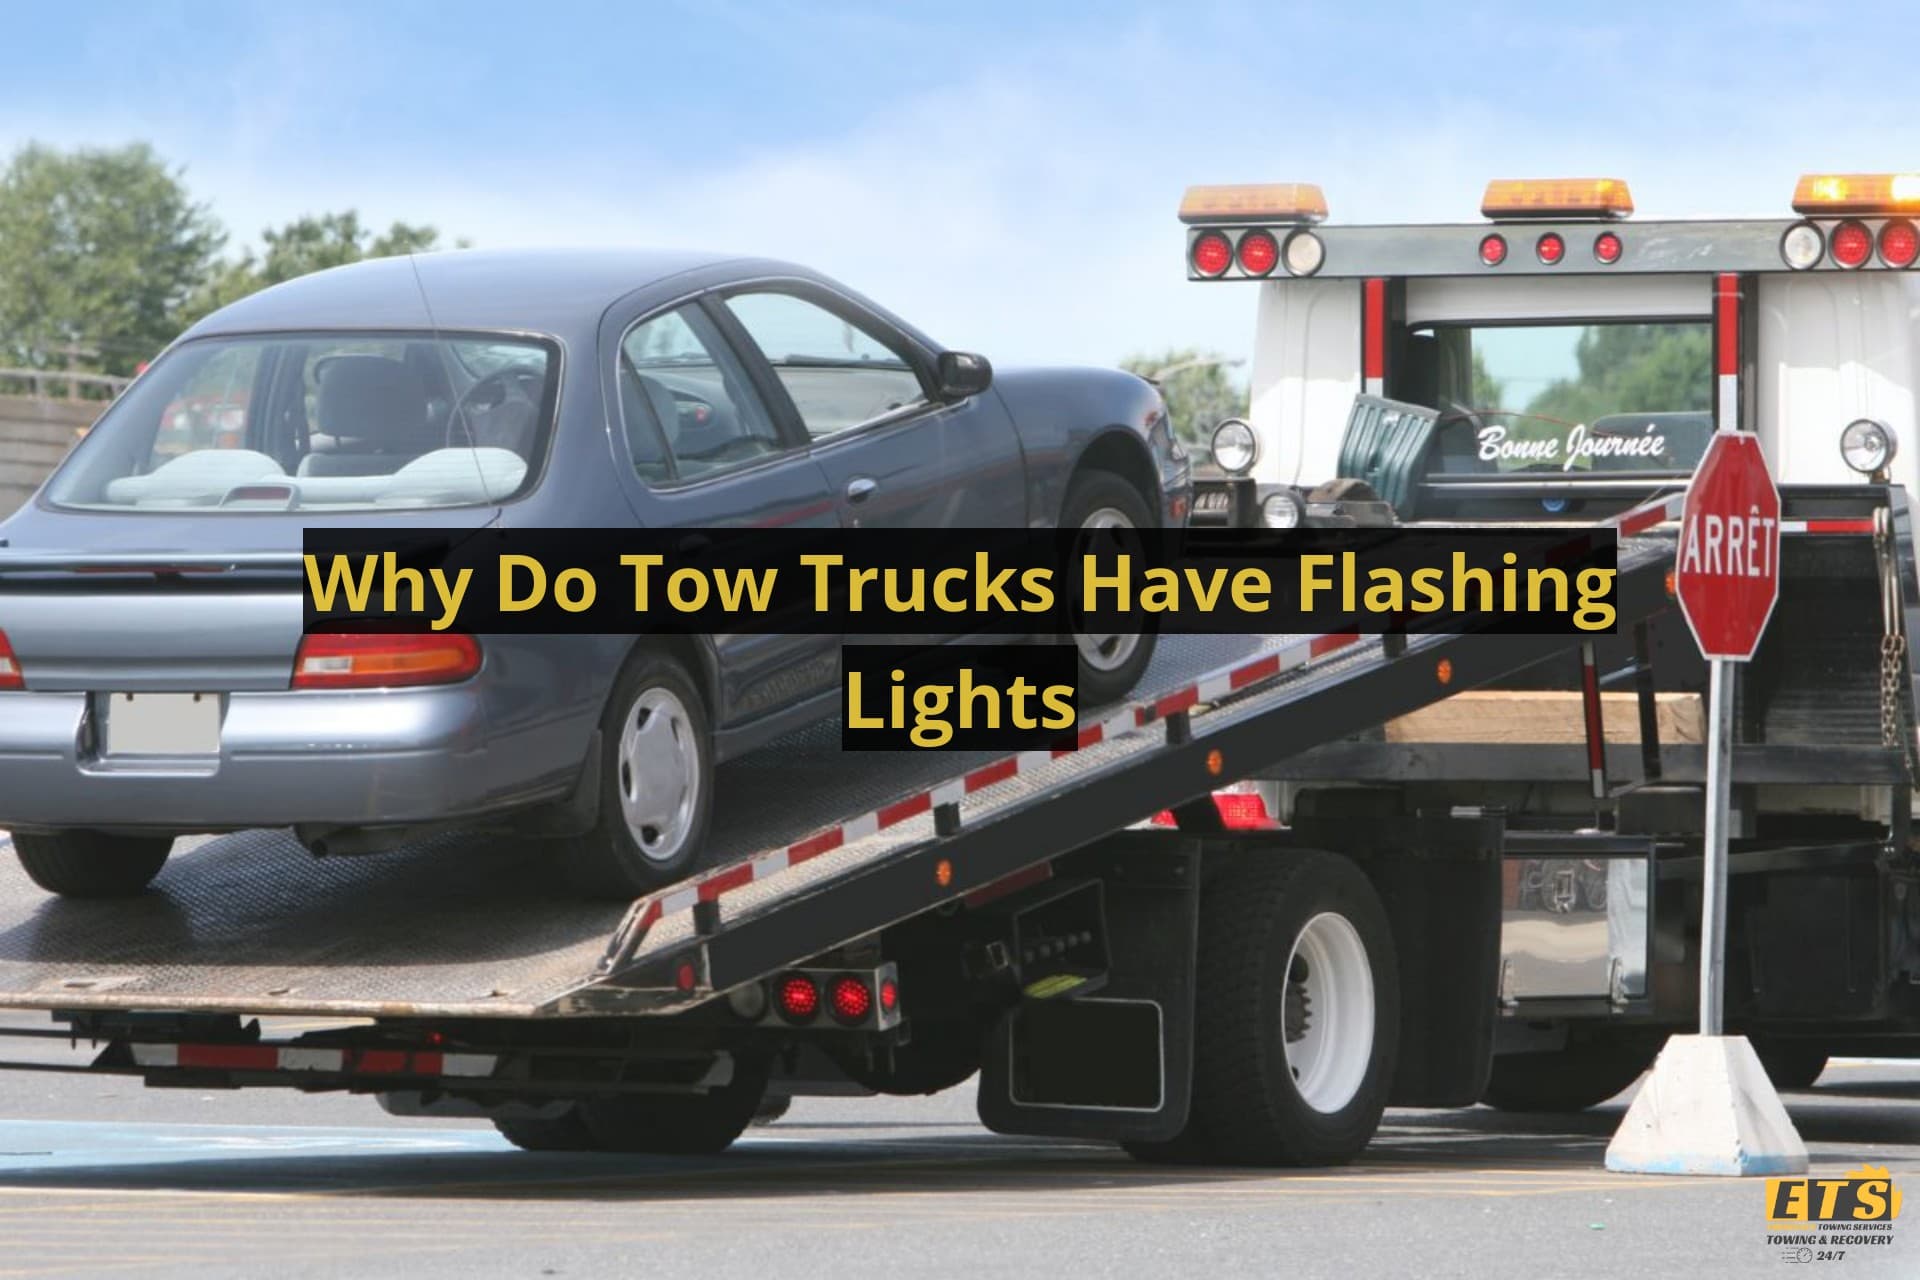 Why Do Tow Trucks Have Flashing Lights